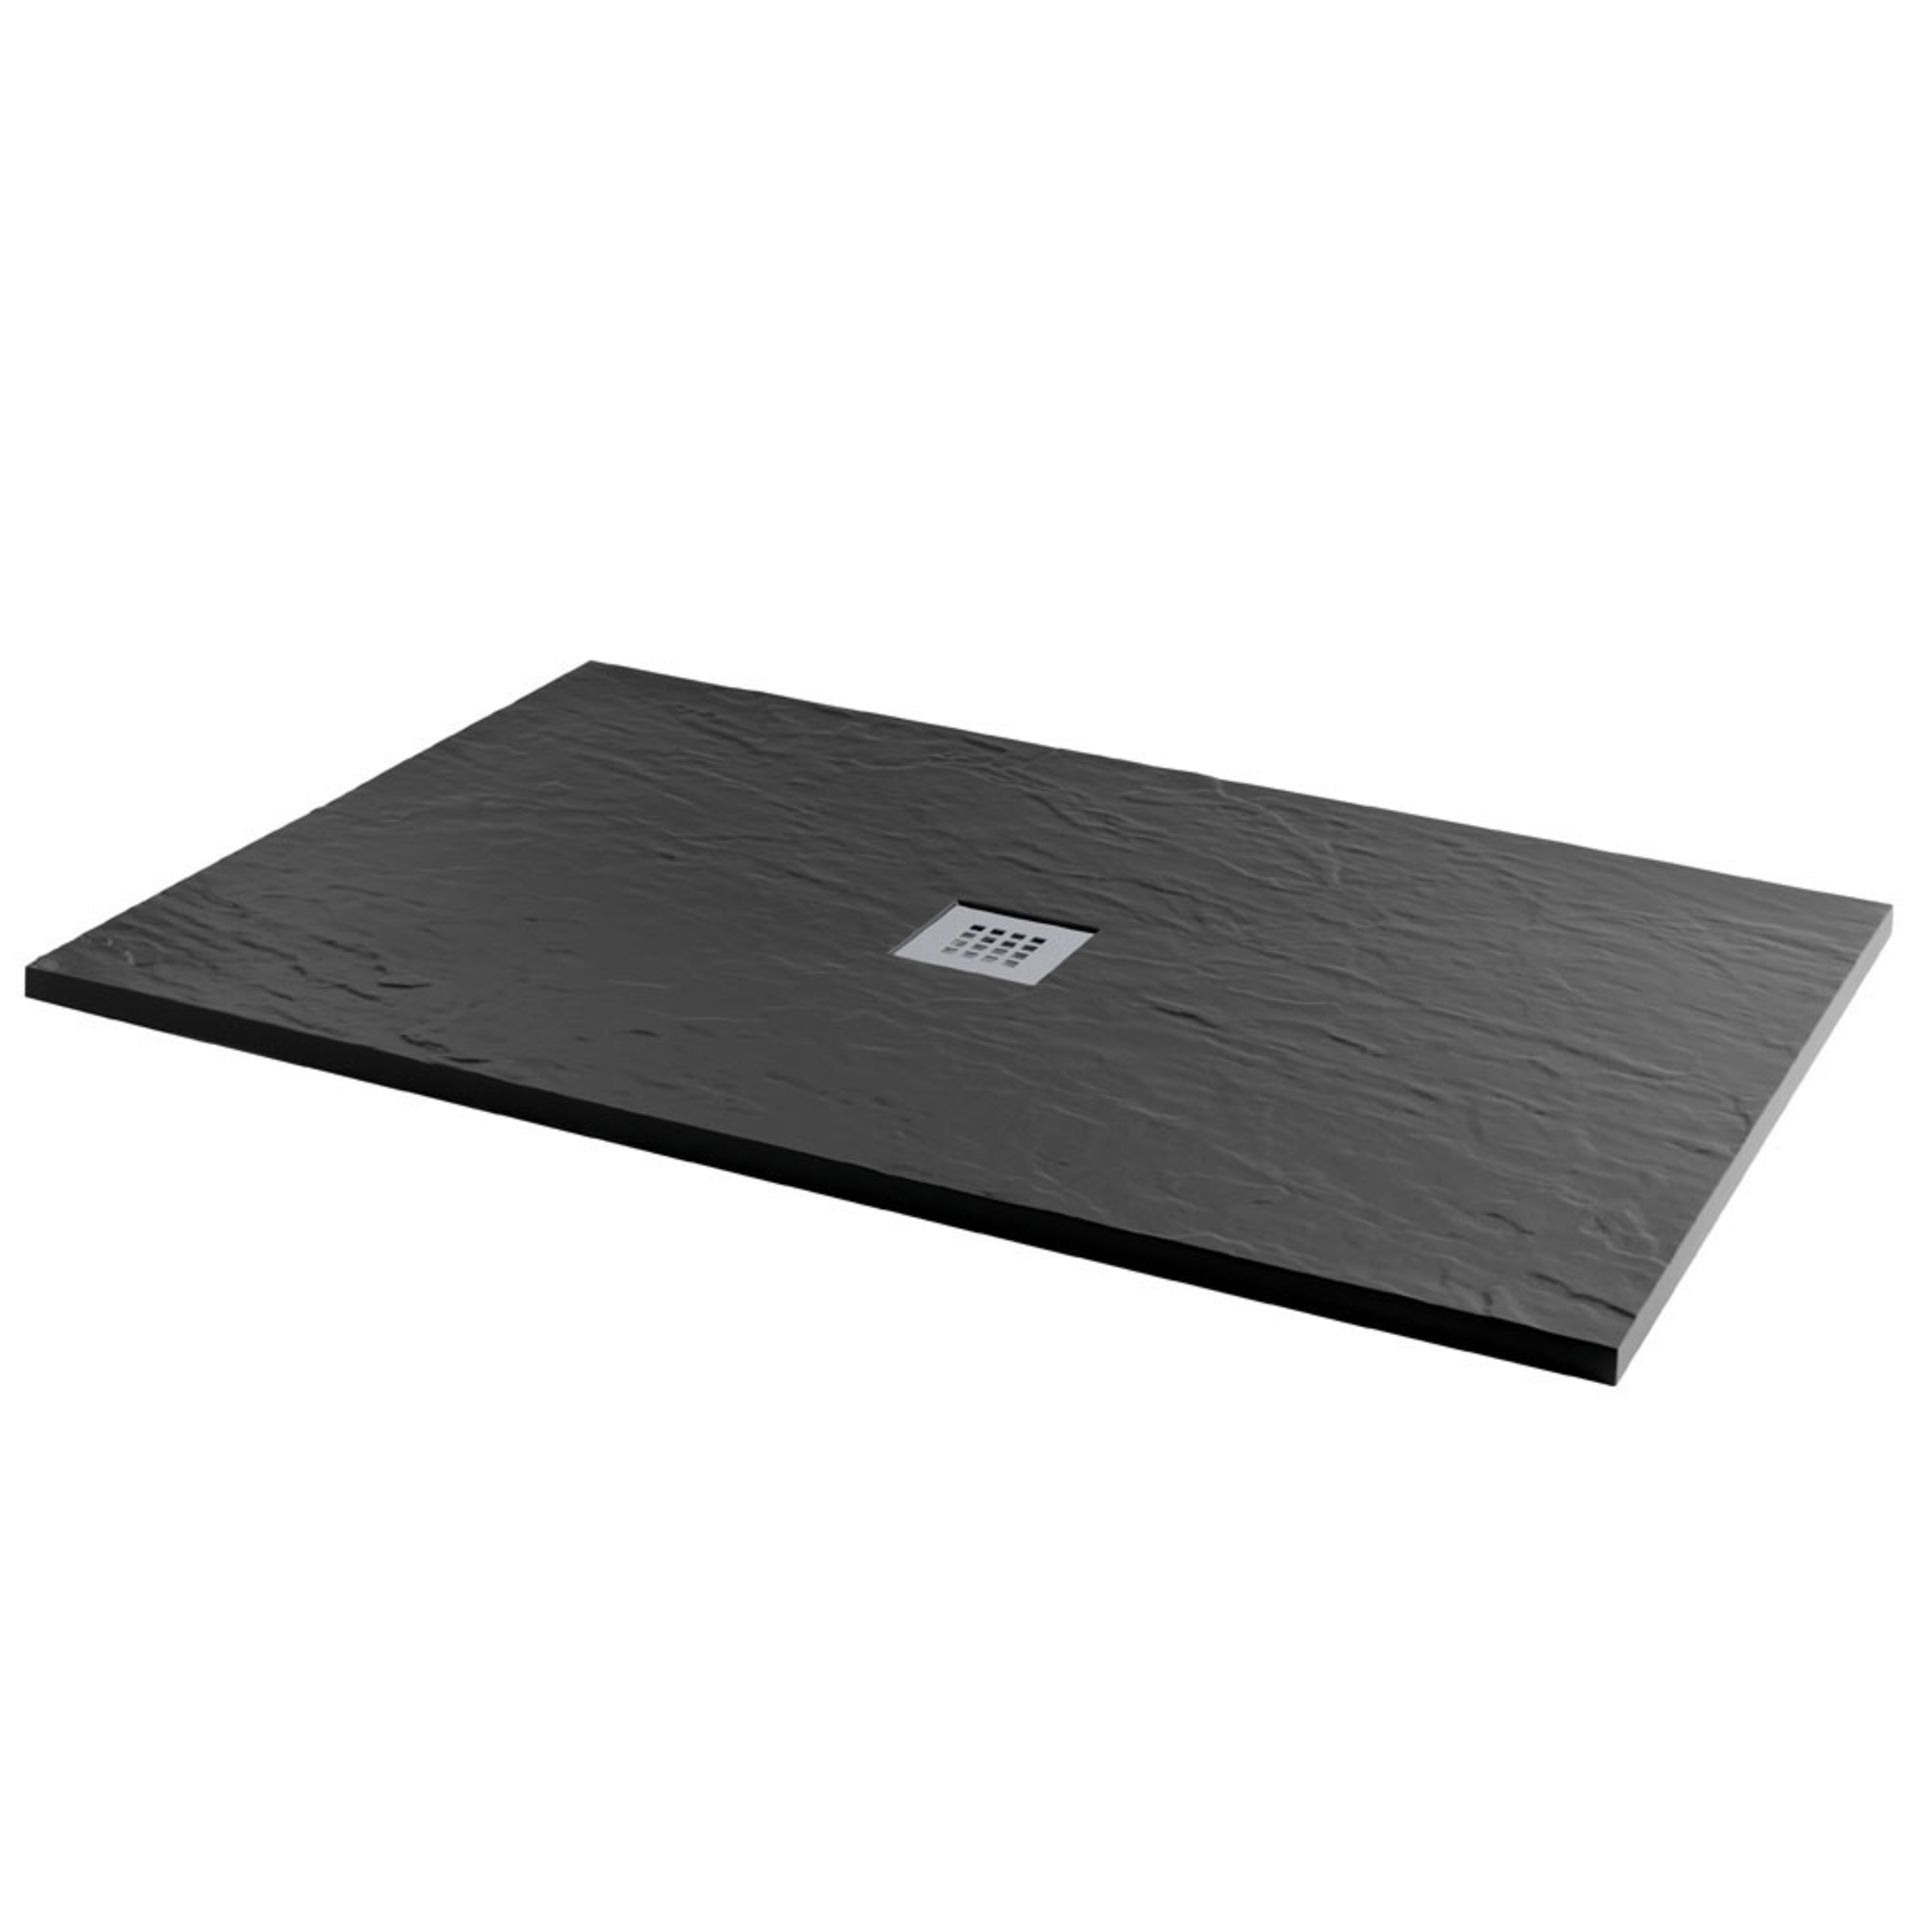 BRAND NEW 1200x800mm Rectangle Black Slate Effect Shower Tray.RRP £569.99.A textured black slate - Image 2 of 2